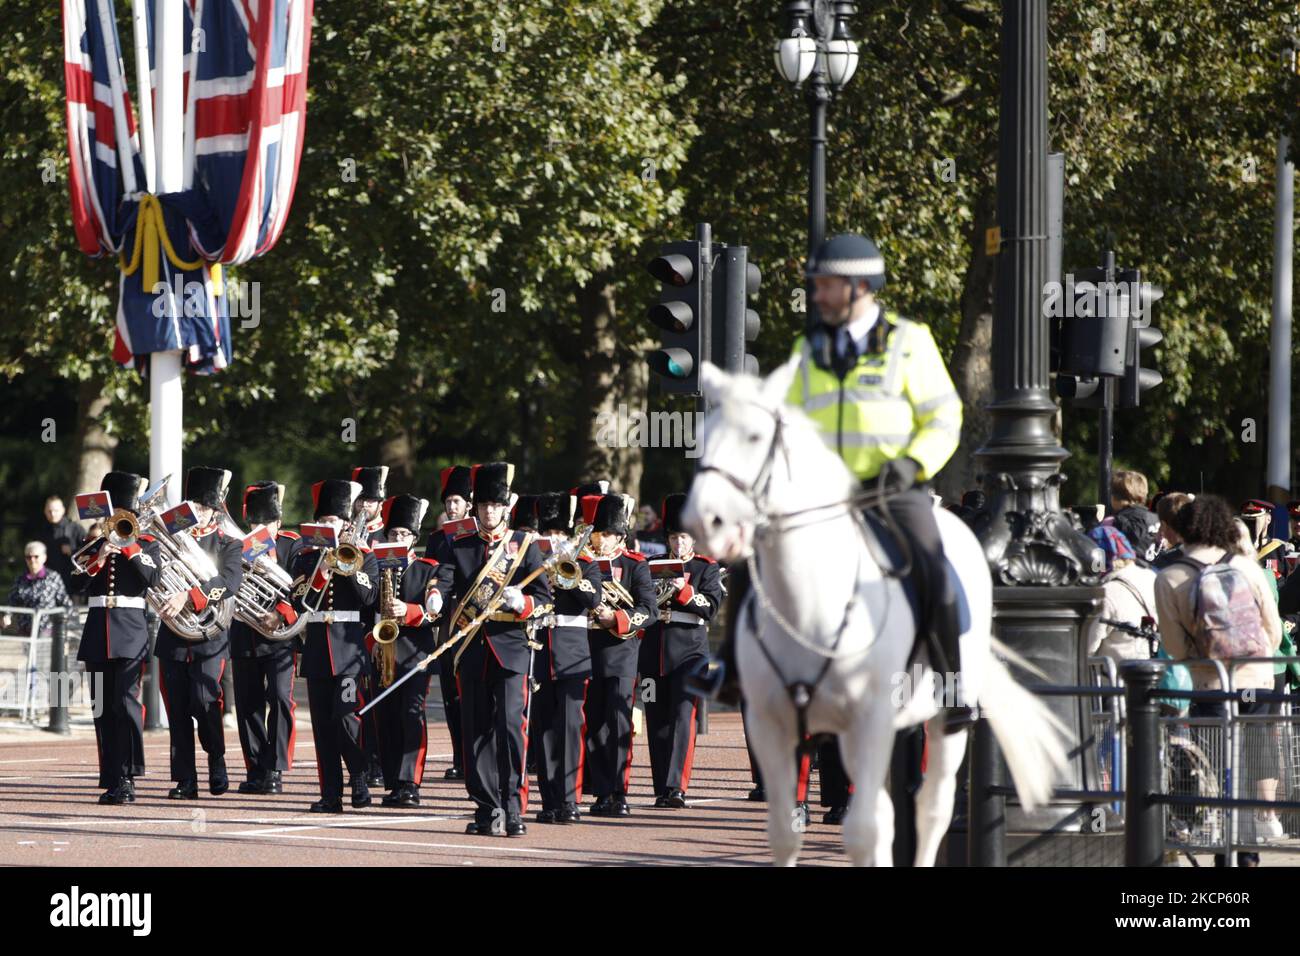 Band members of the Royal Regiment of Canadian Artillery march along the Mall from St James's Palace to Buckingham Palace during their first Changing of the Guard 'dismount' from duty in London, England, on October 6, 2021. Ninety Canadian personnel are carrying out Queen's Guard duties at the four residences of the Royal Family in London (Buckingham Palace, St James's Palace, Windsor Castle and the Tower of London) from October 4-22. For the mount and dismount ceremonies, which take place several times throughout the period, the Queen’s Guard troops are accompanied by the 36-person Royal Cana Stock Photo